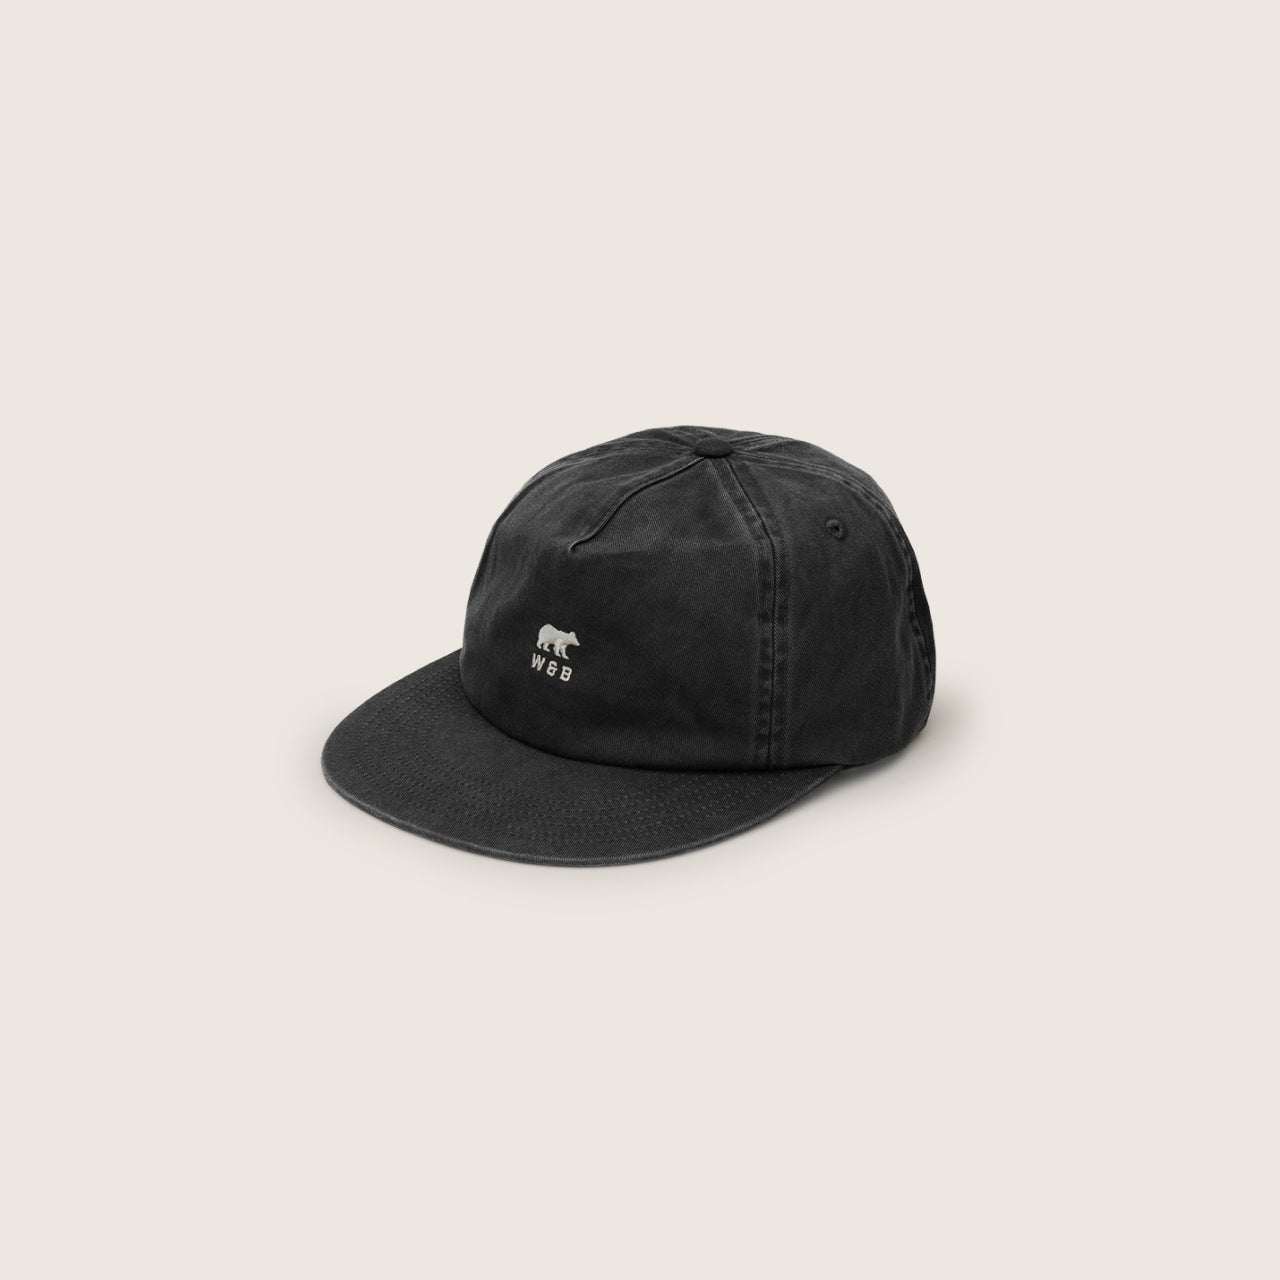 Product image of the Ranger Black Cap side view